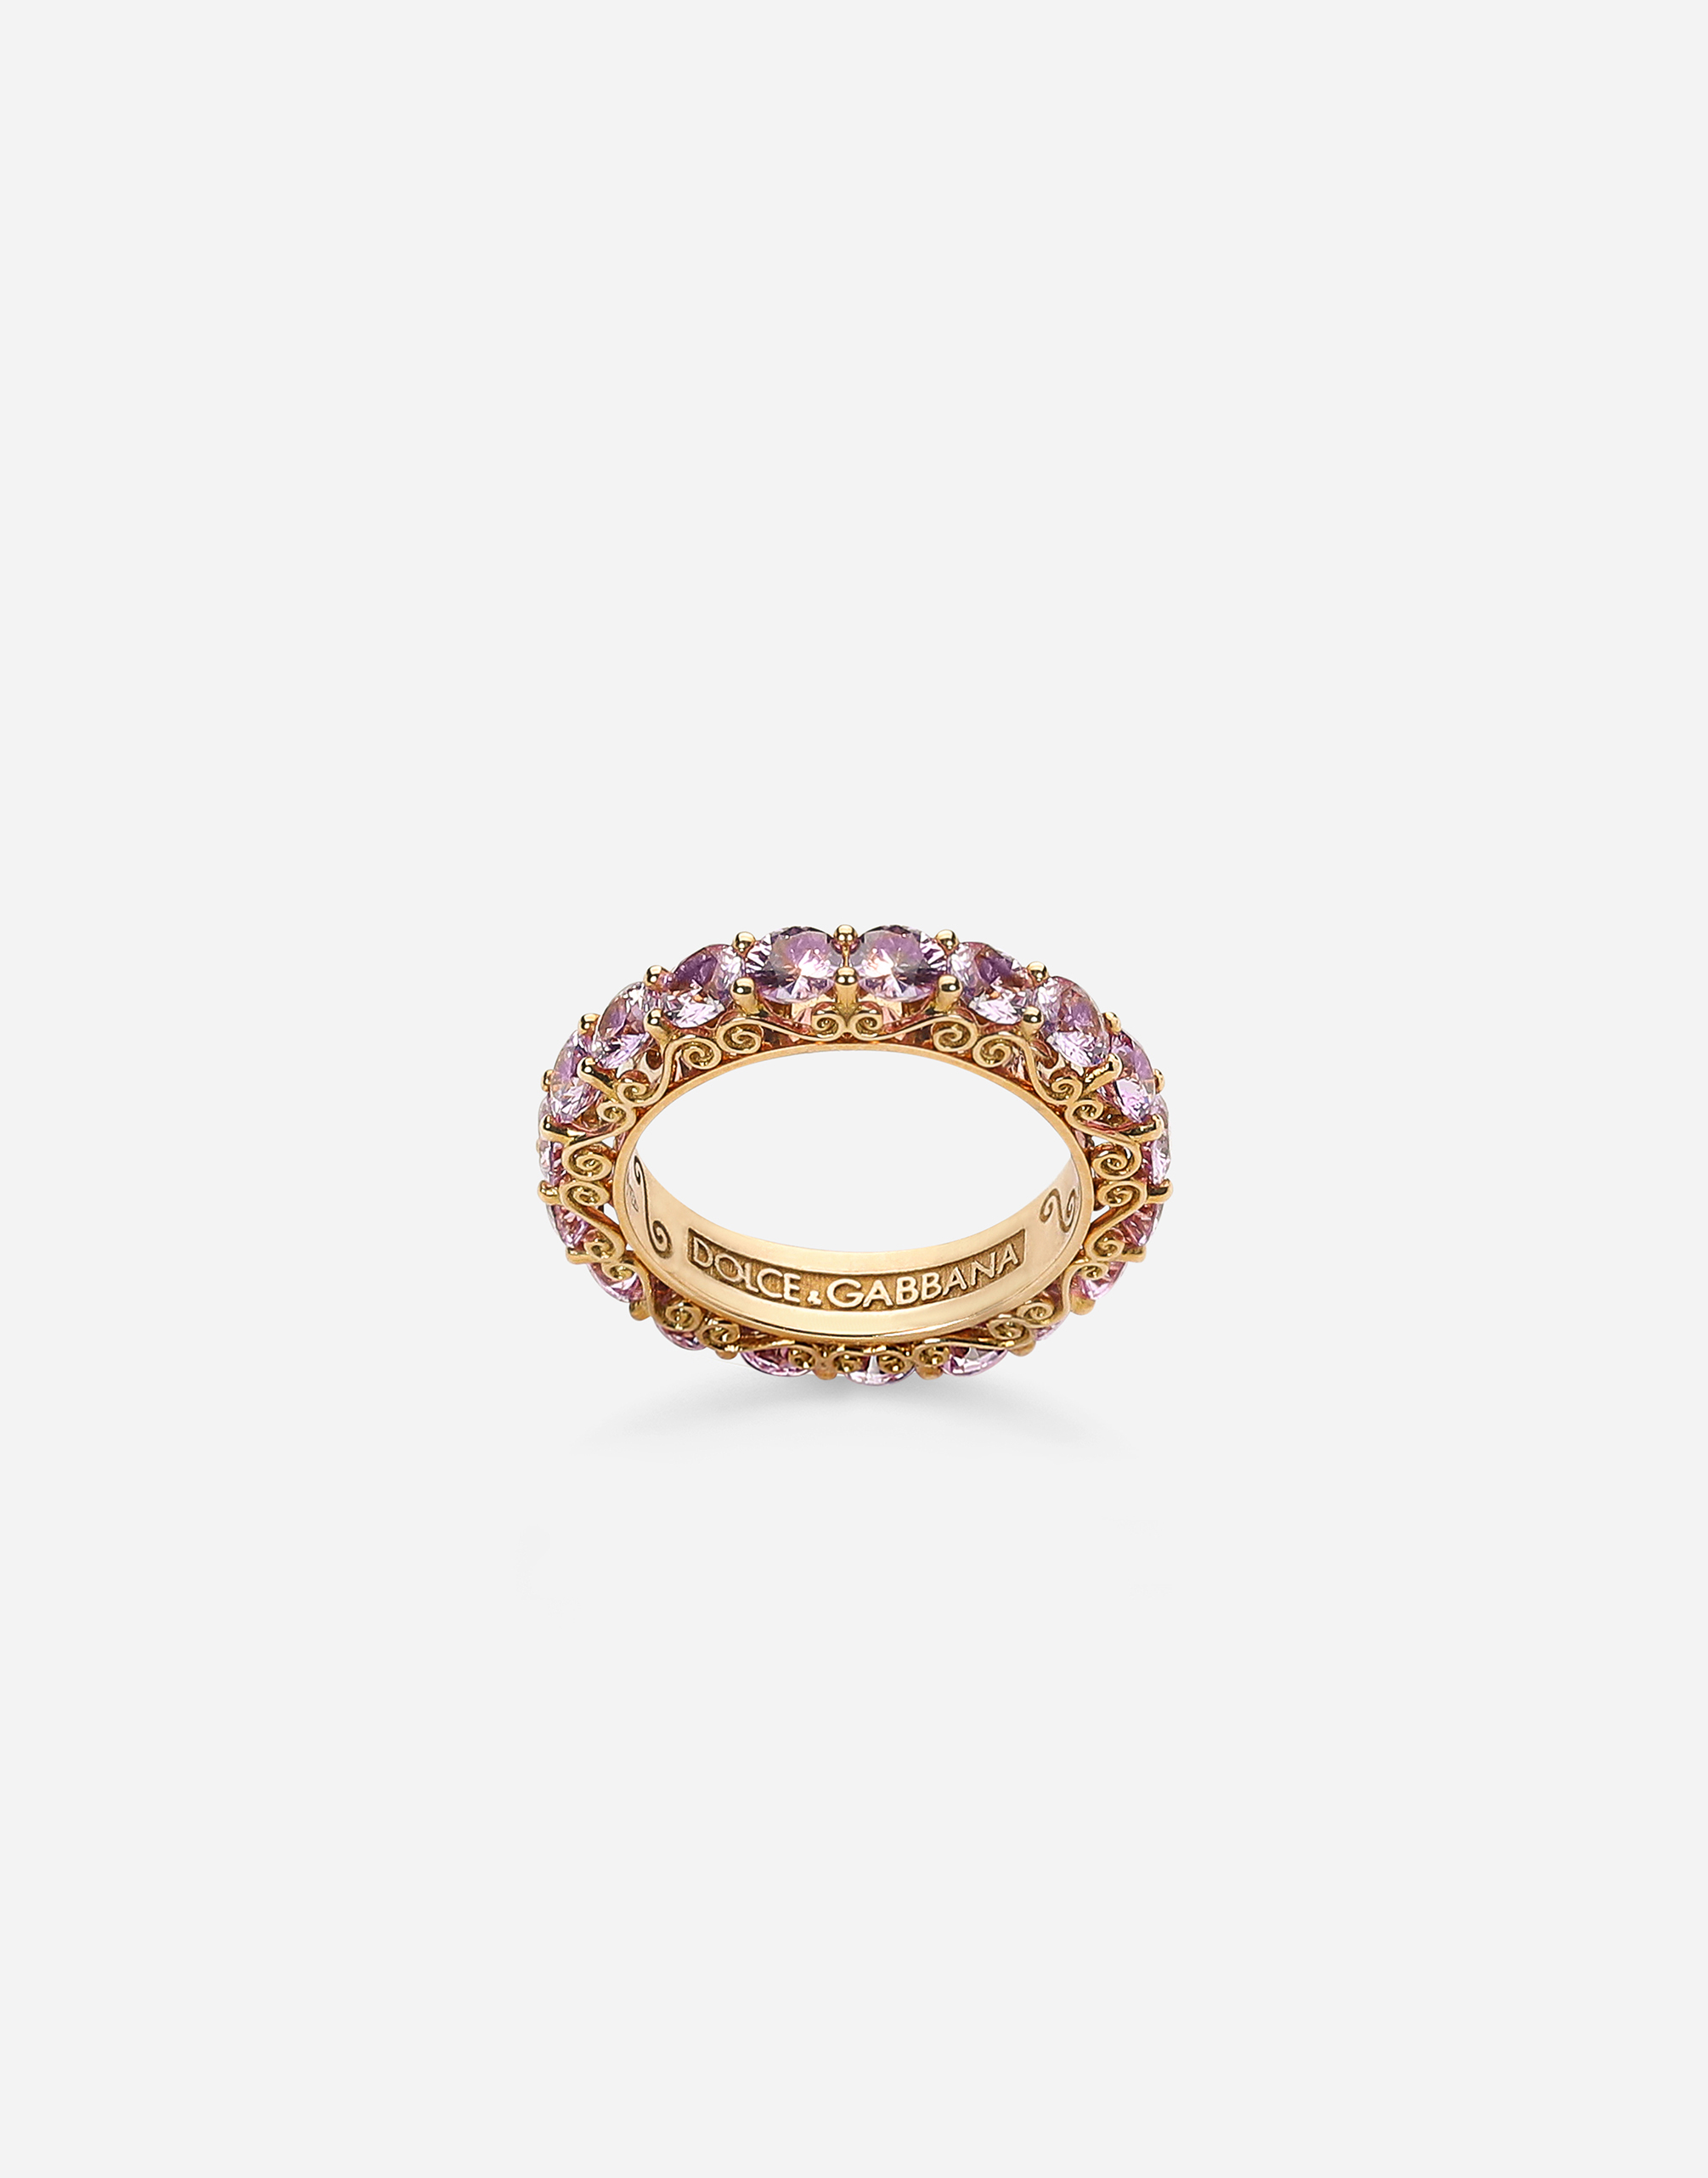 Heritage band ring in yellow 18kt gold with pink sapphires in Gold